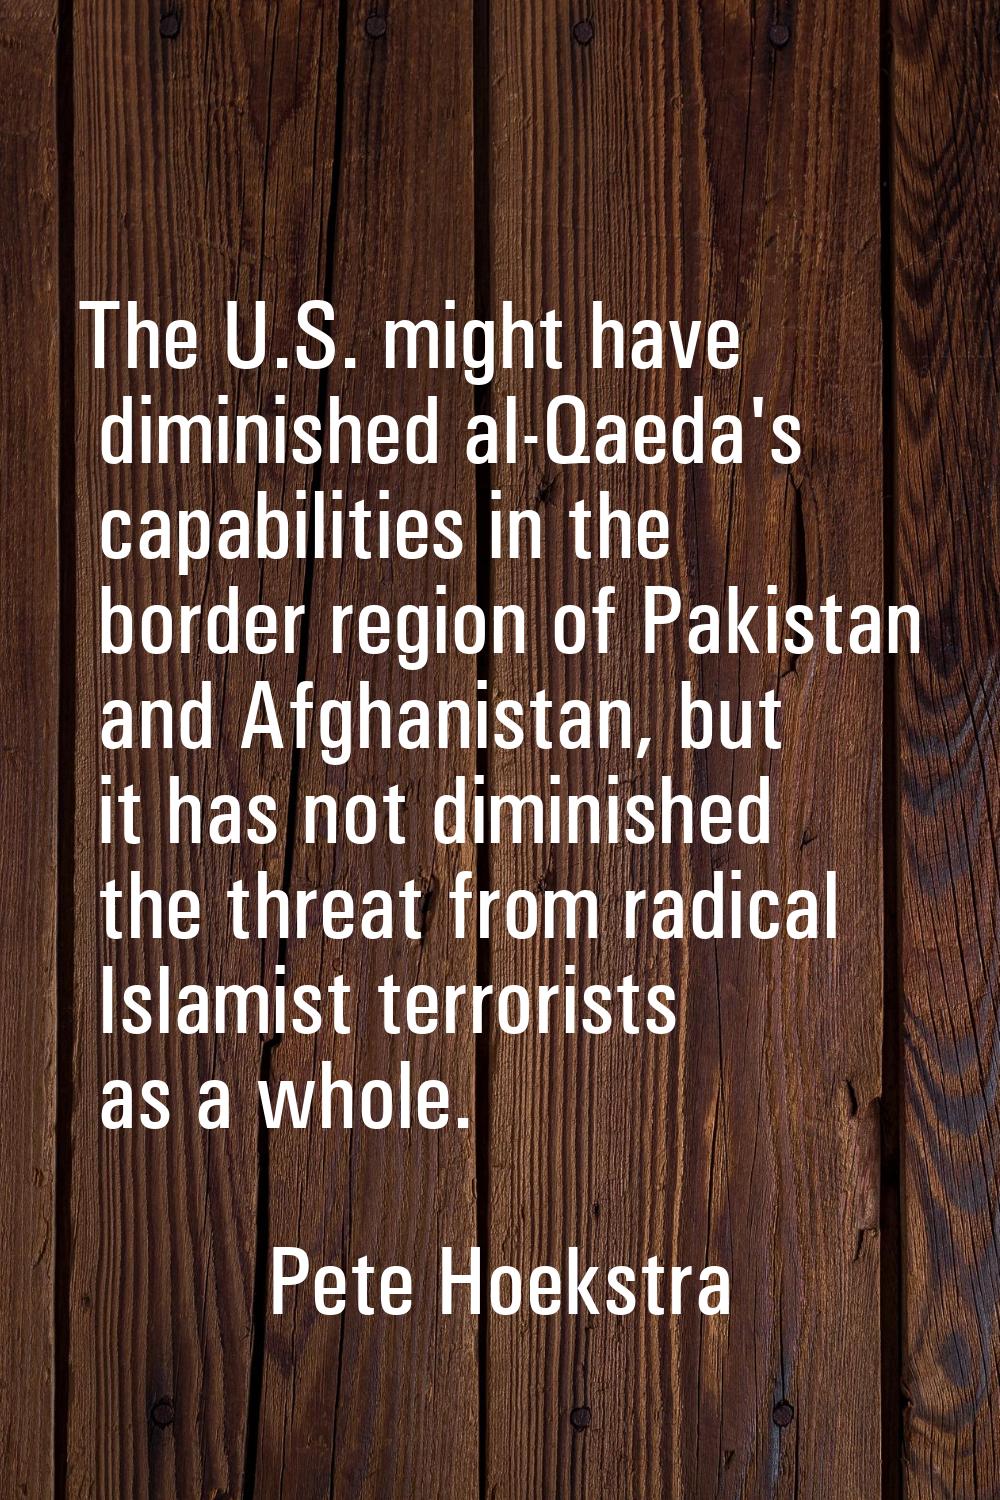 The U.S. might have diminished al-Qaeda's capabilities in the border region of Pakistan and Afghani